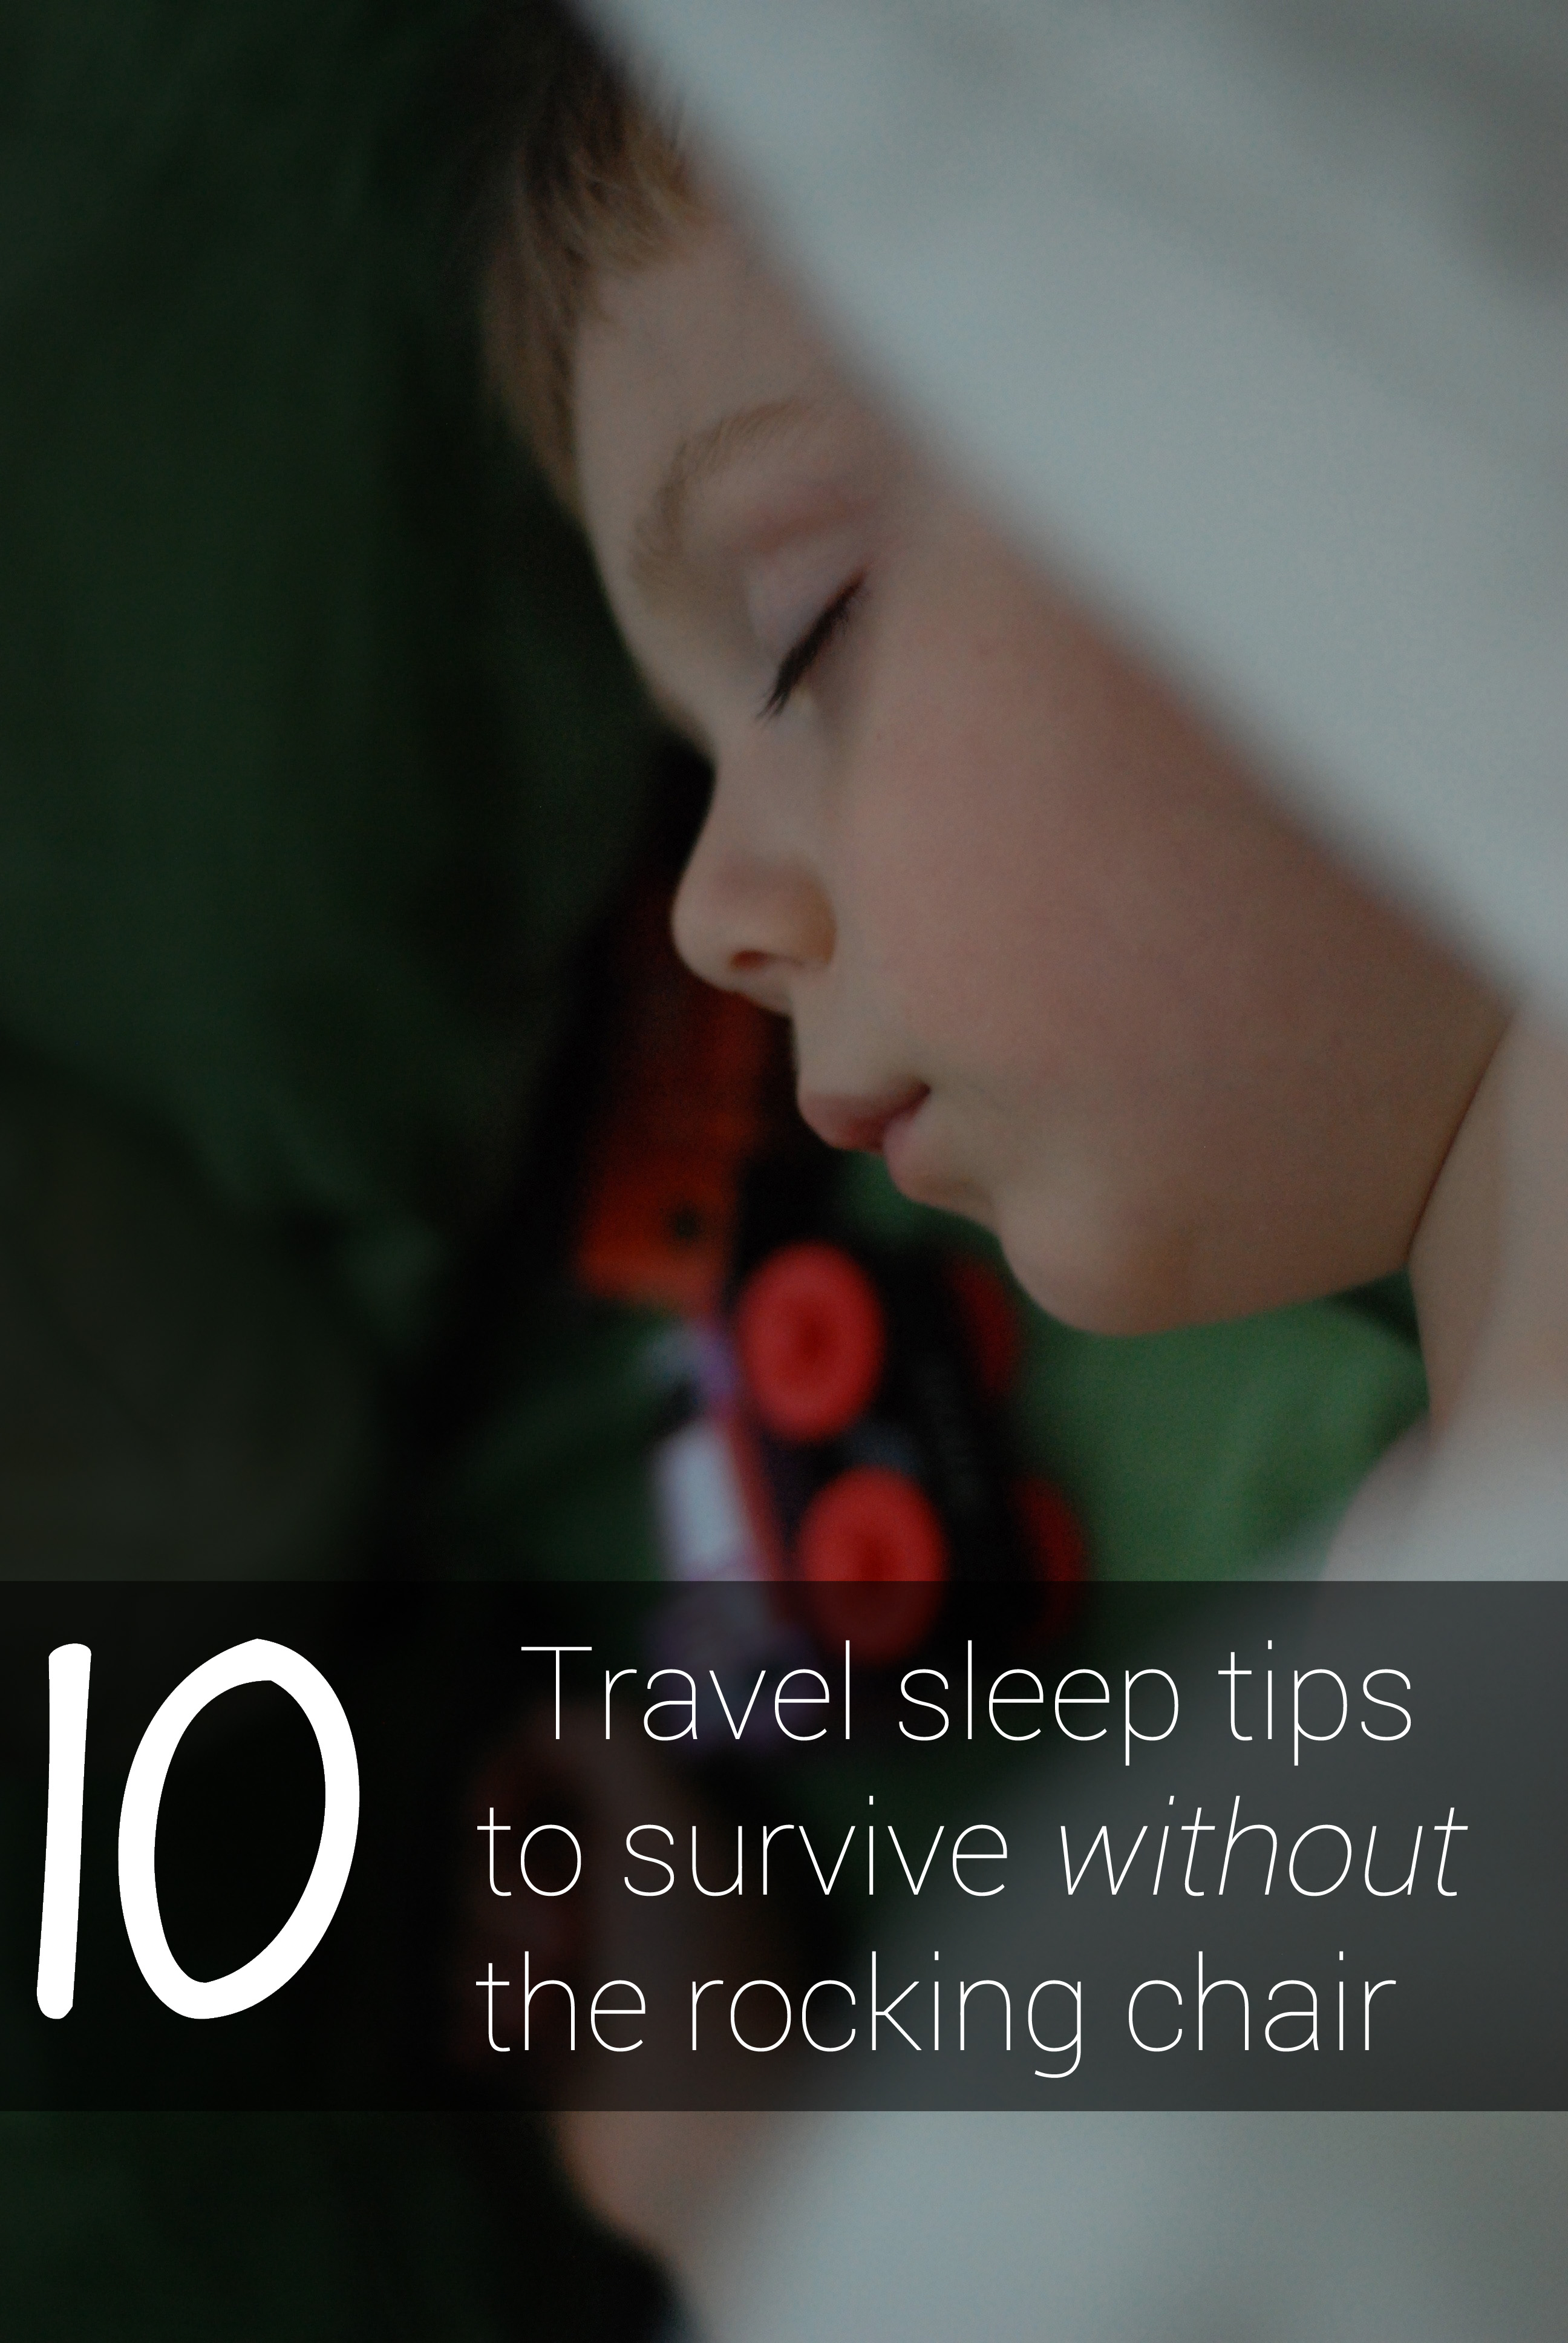 Travel sleep tips to survive without a rocking chair